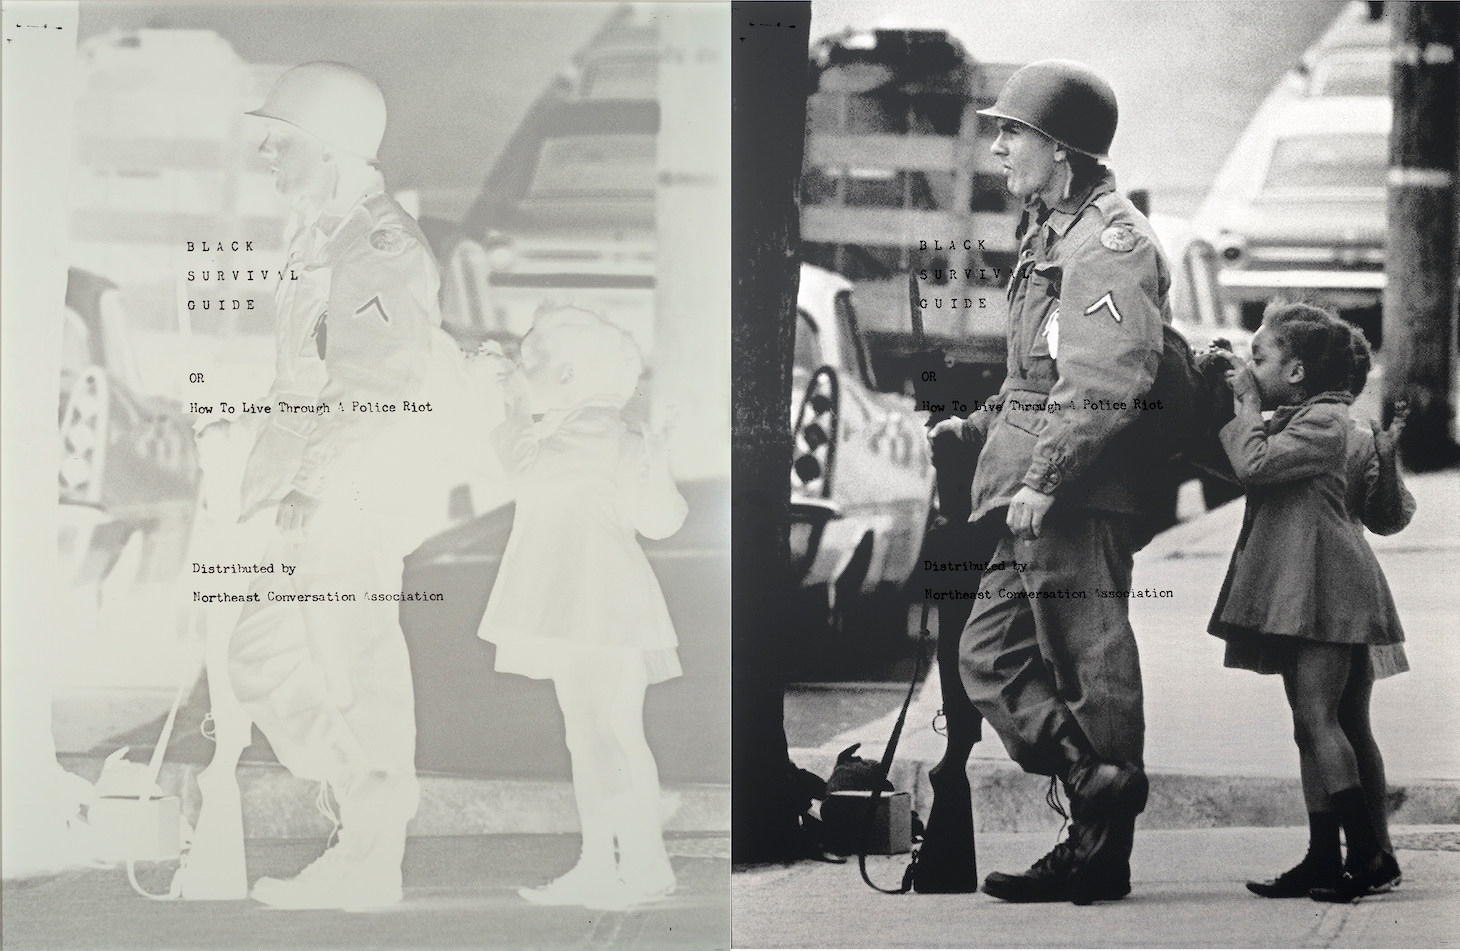 screen print on retroreflective vinyl with aluminum backing, photograph of Wilmington riots and National Guard occupation